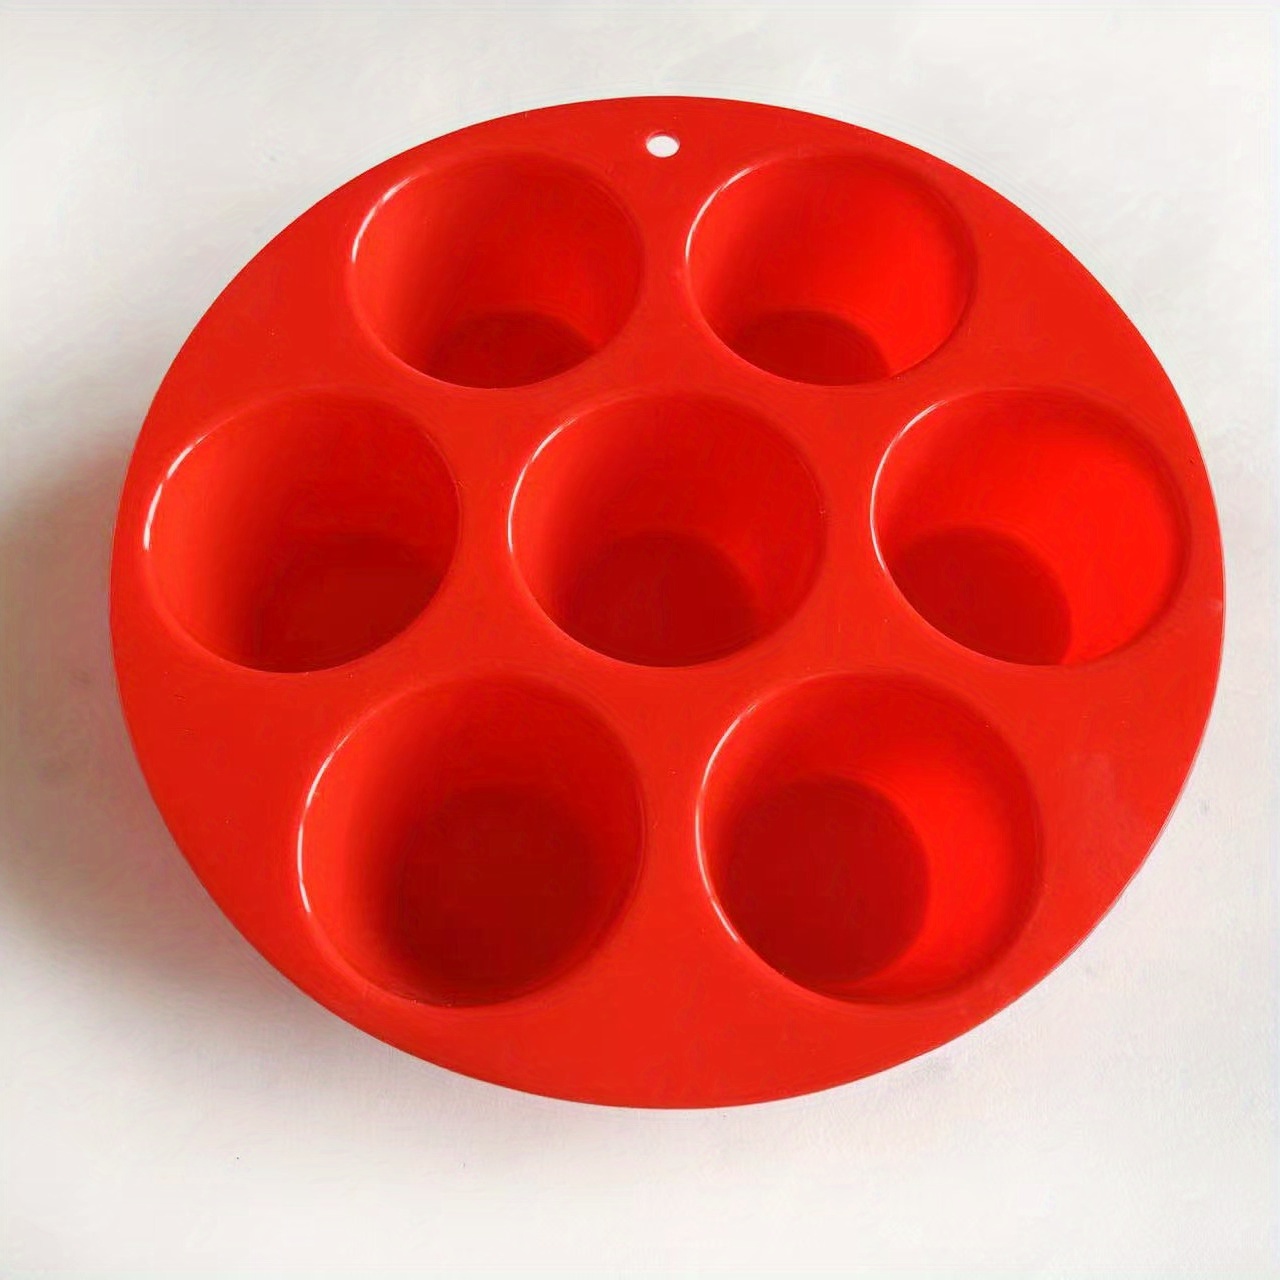 Instant Pot Silicone Egg Bites Pan with Lid